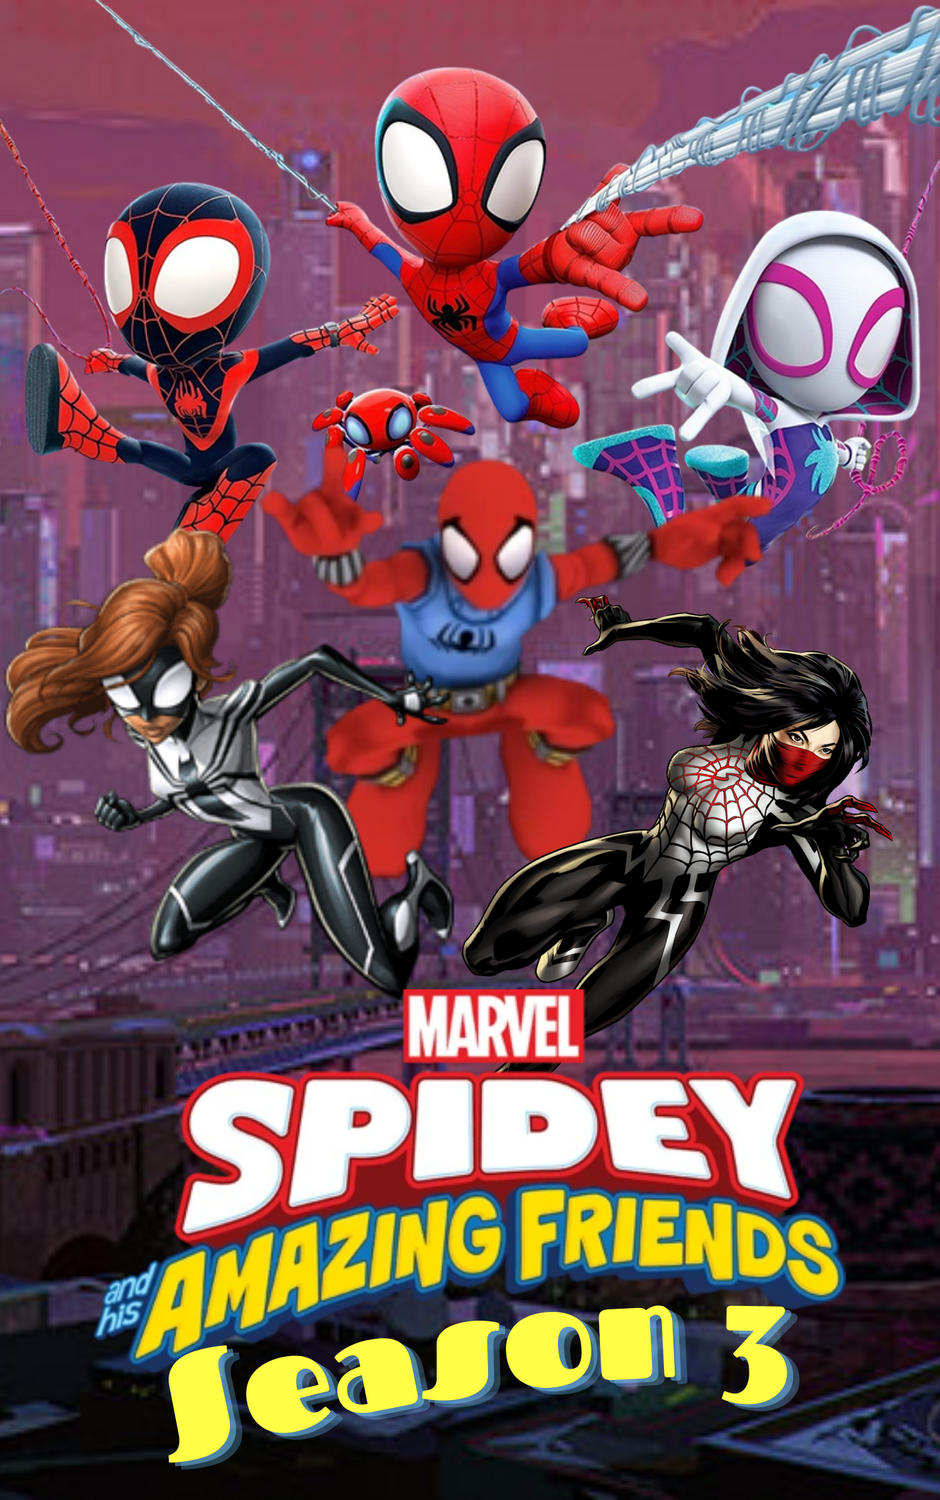 Spidey and his Amazing Friends Season 3? by LupinMK on DeviantArt